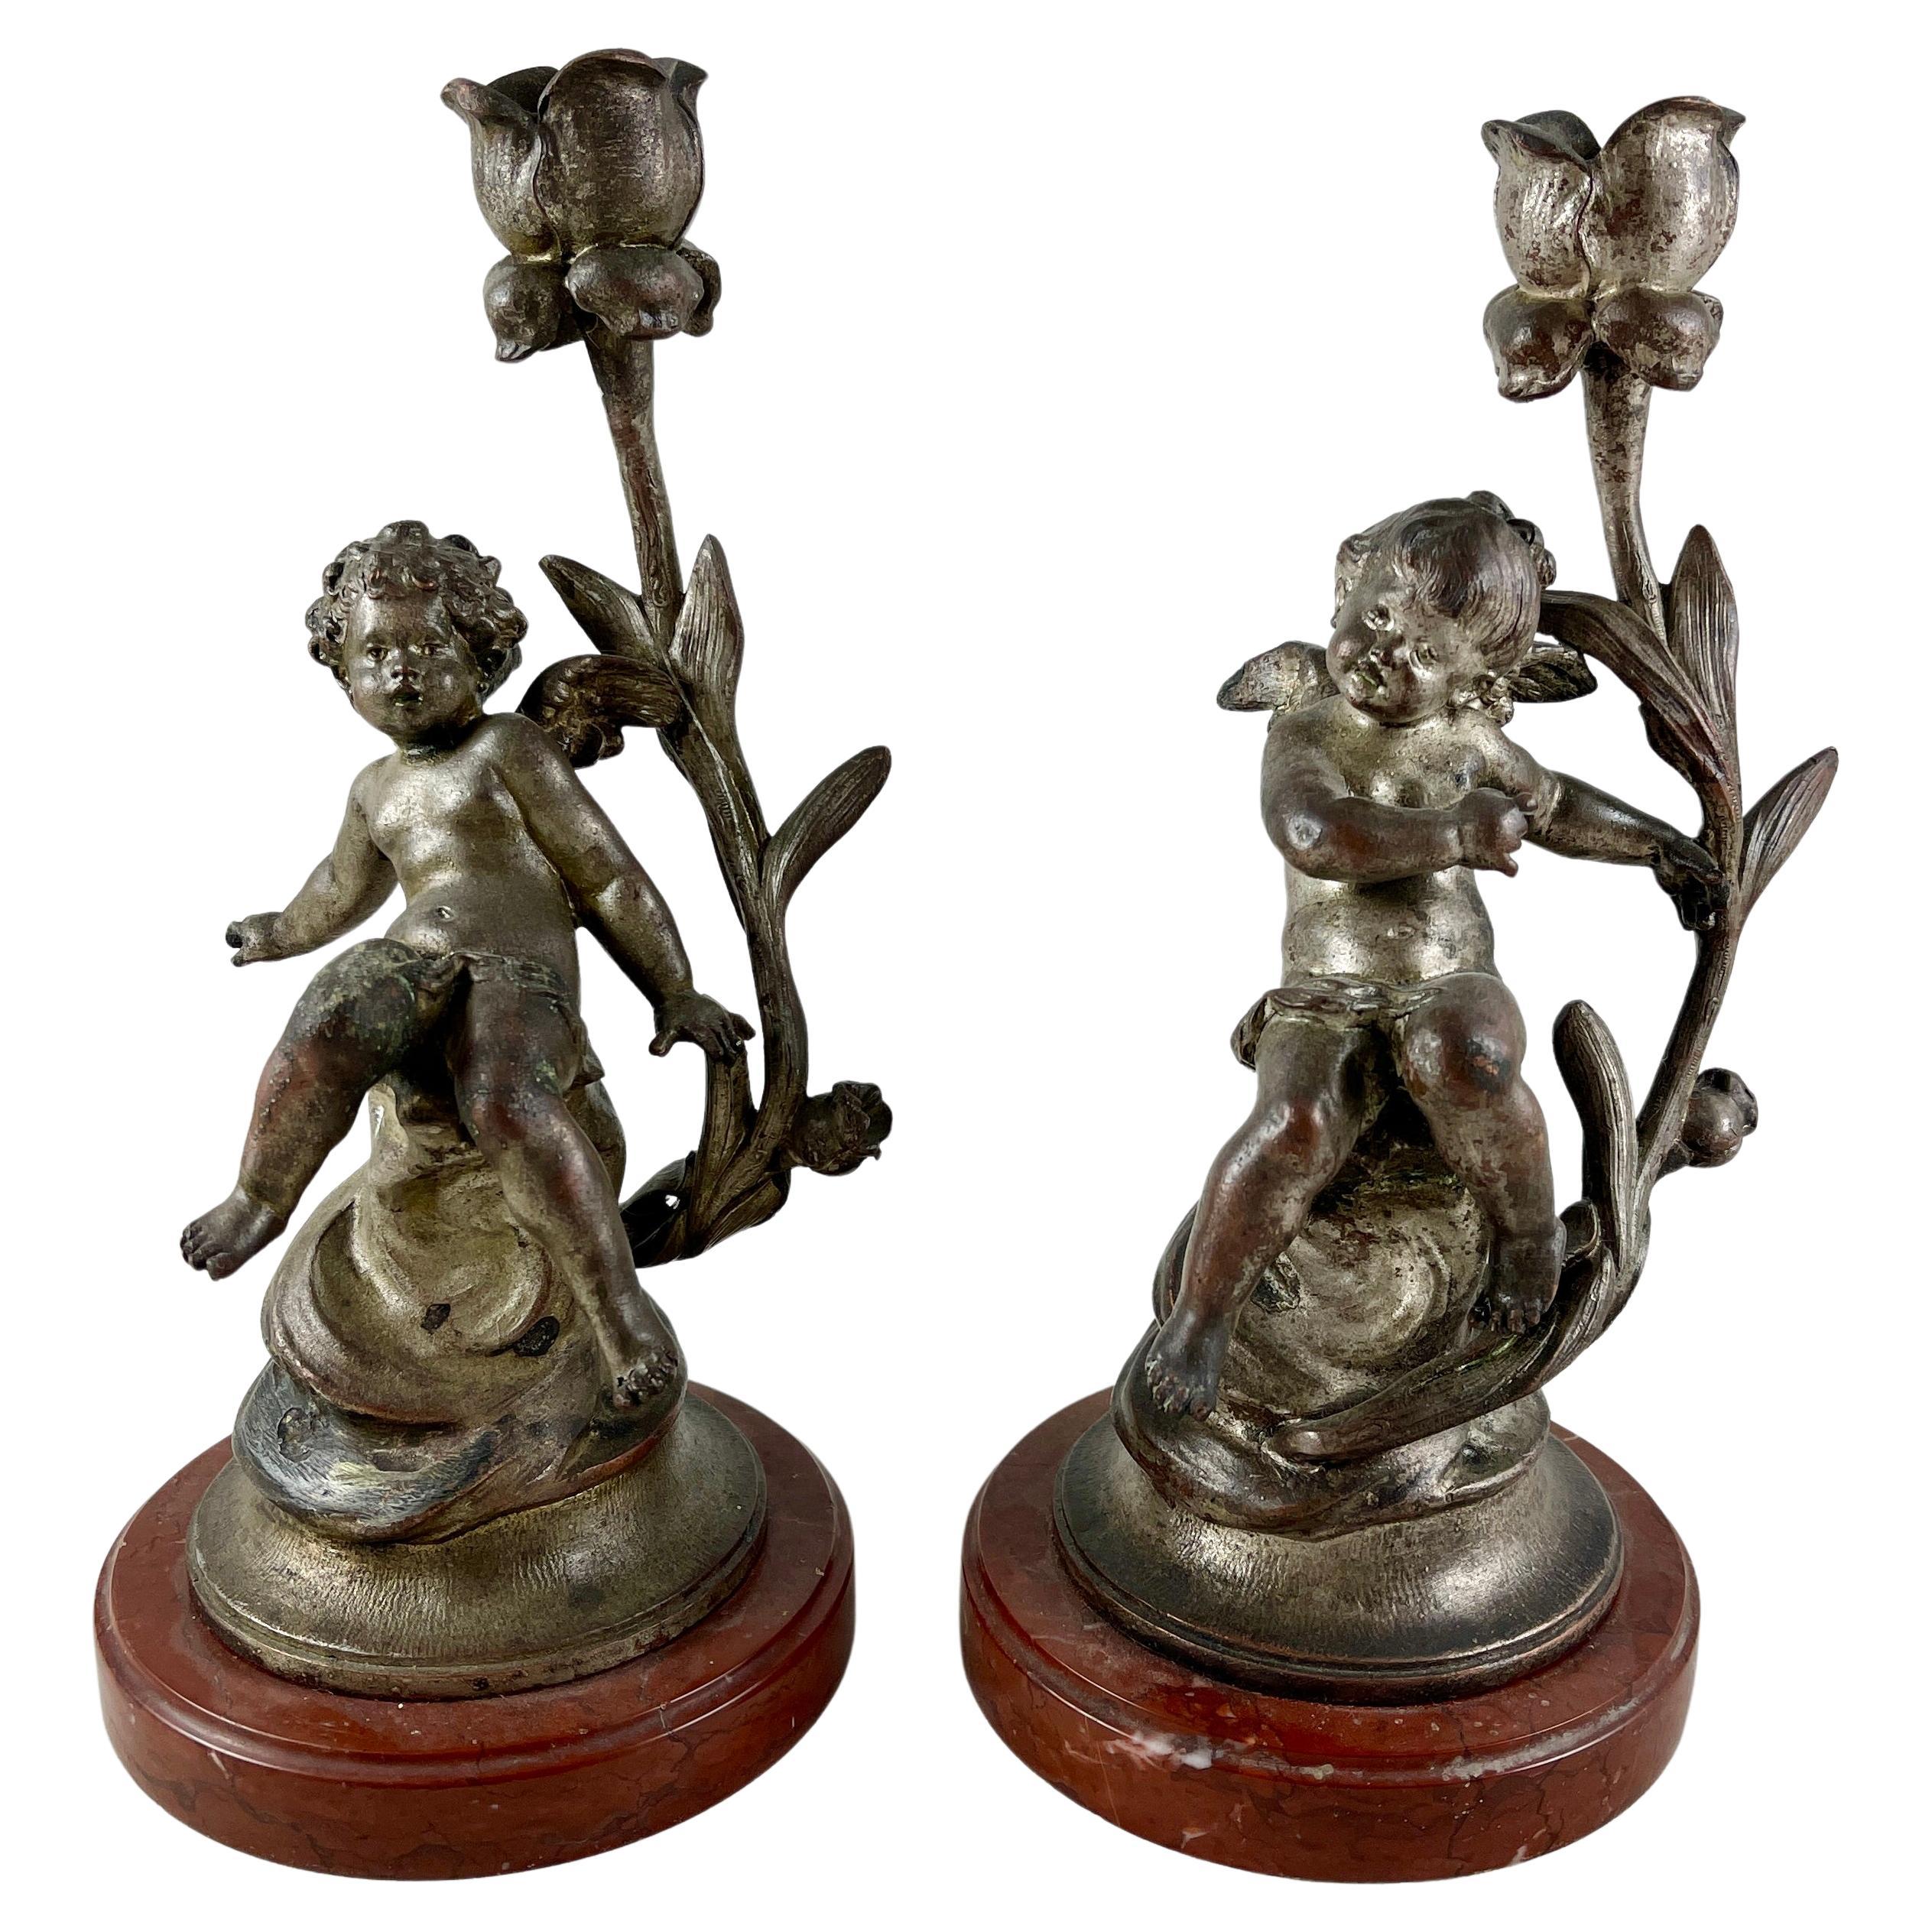 French Putti Cherub Candlesticks Signed Sylvain Kinsburger Spelter & Marble S/2 For Sale